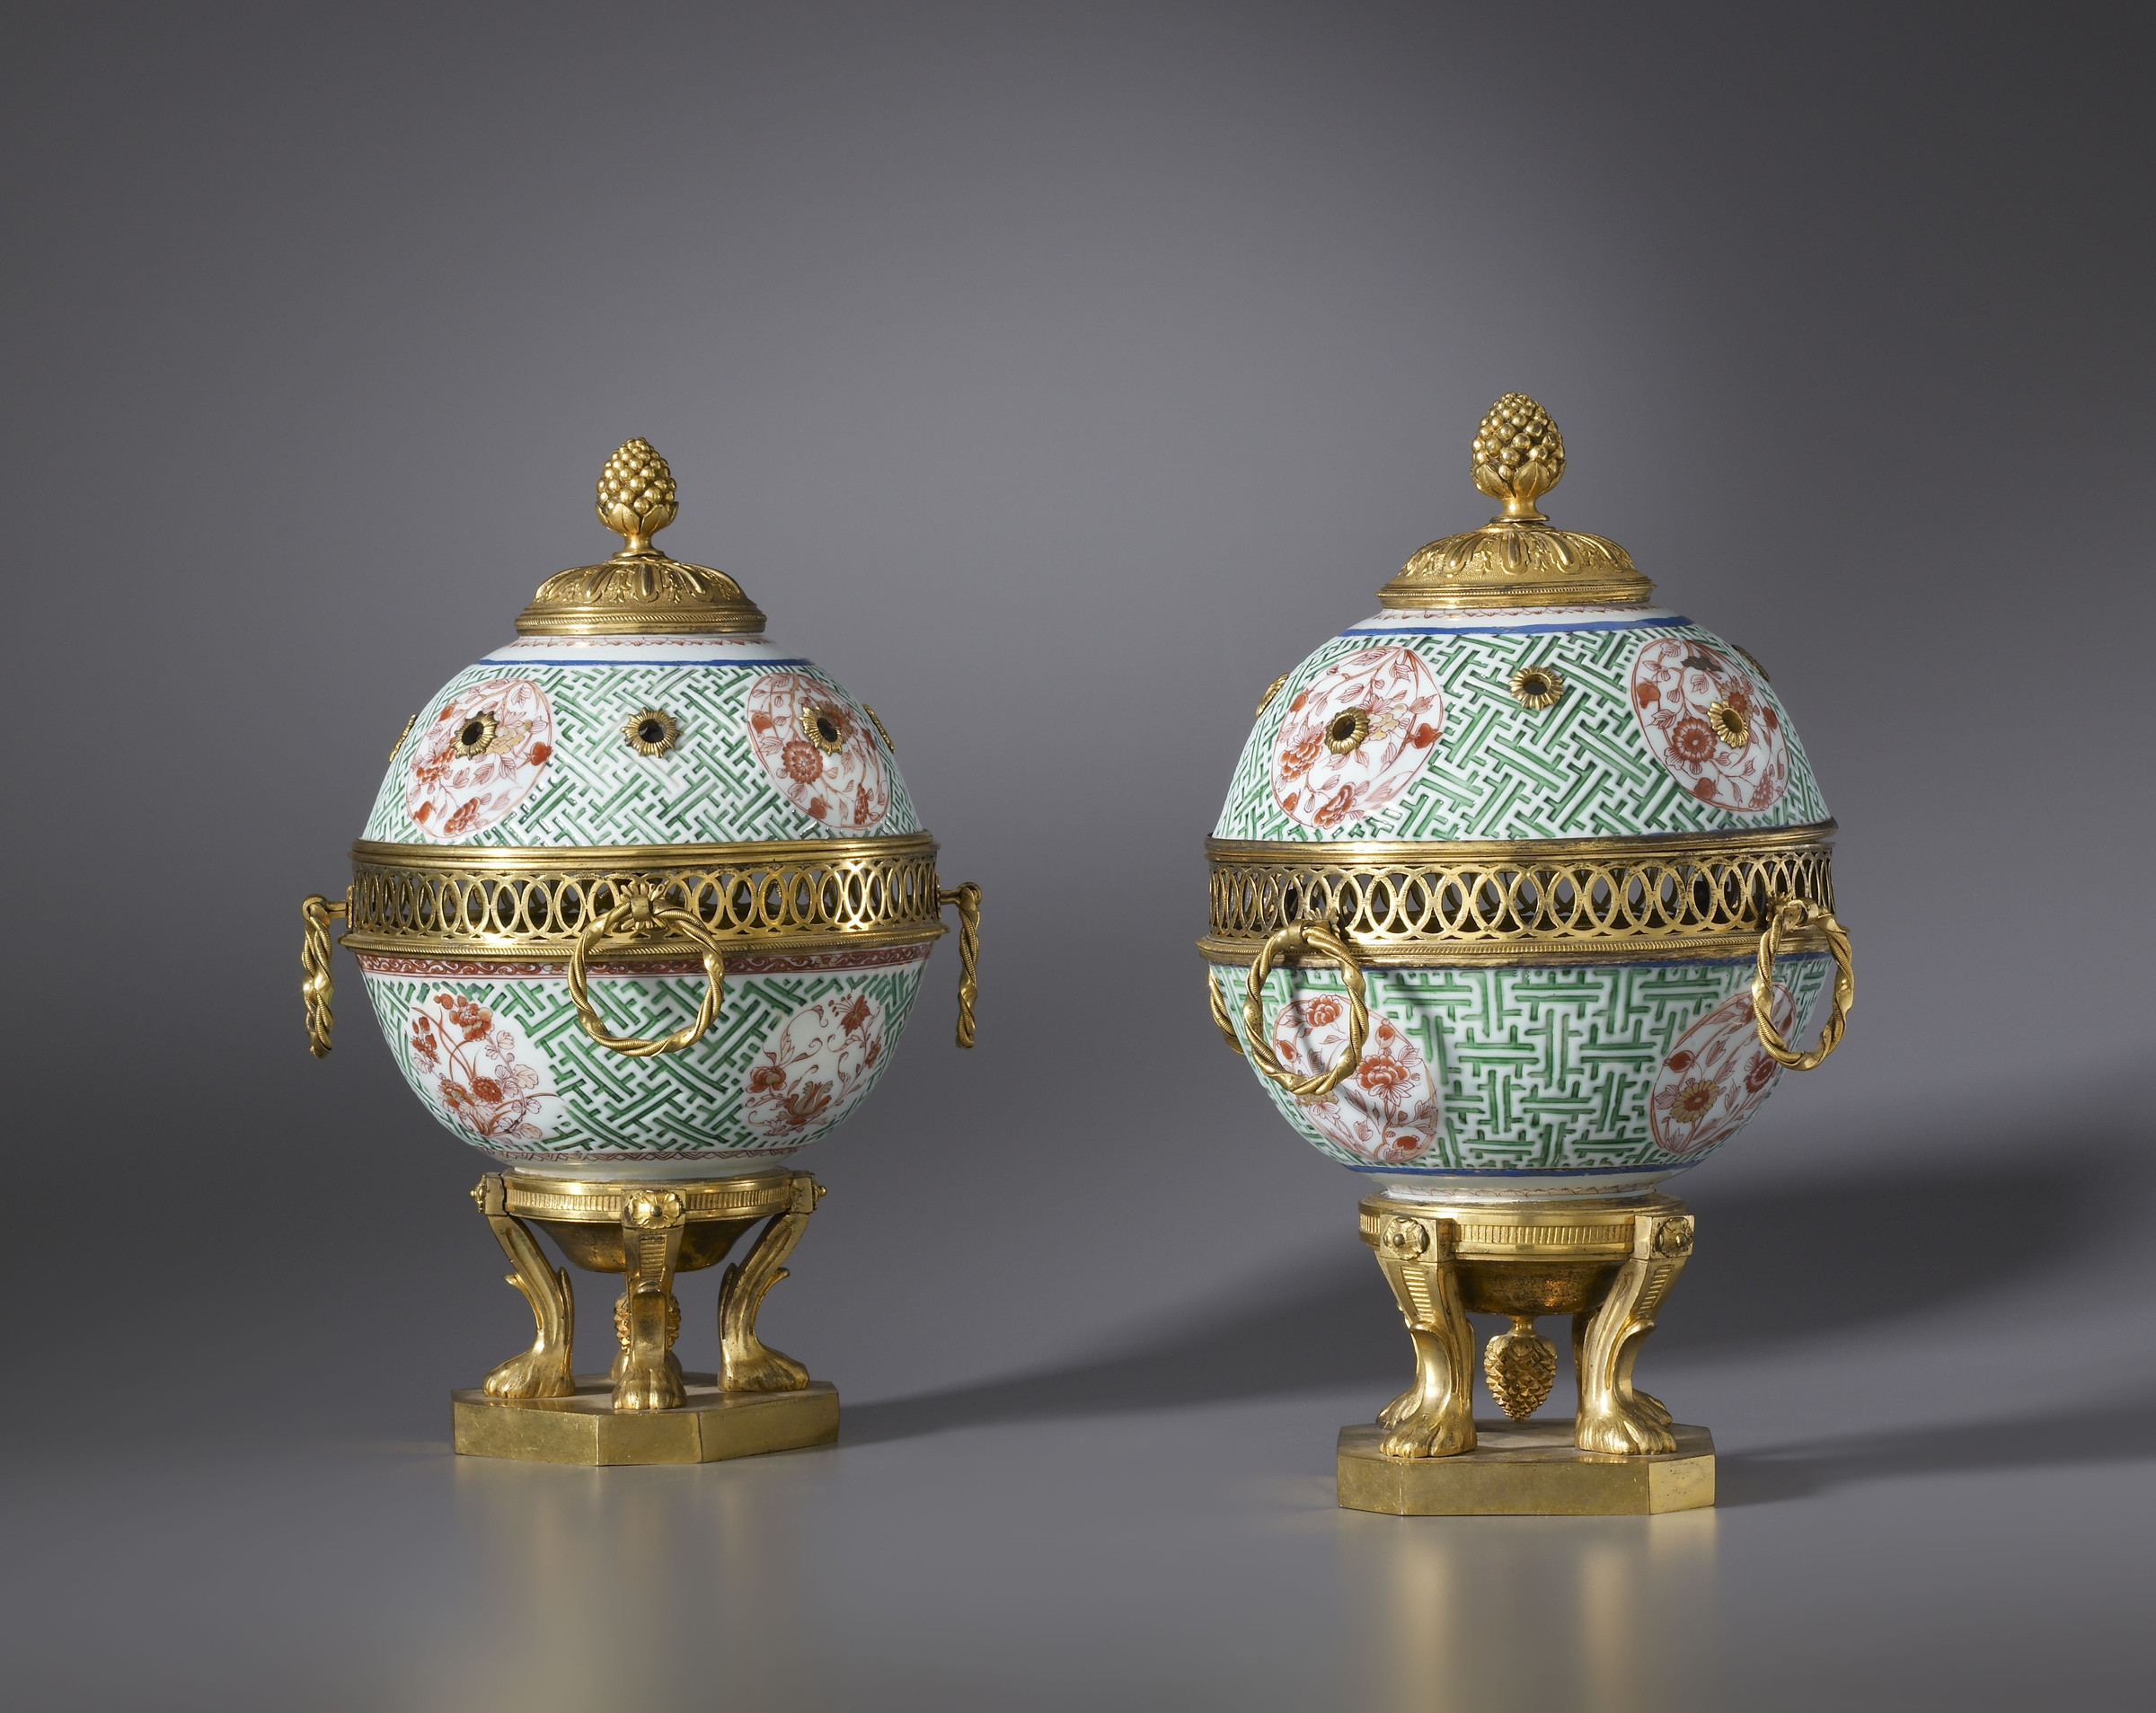 20 attractive Antique Chinese Vases 2024 free download antique chinese vases of unknown a pair of ragence pot pourri vases with lid the porcelain pertaining to a pair of ragence pot pourri vases with lid